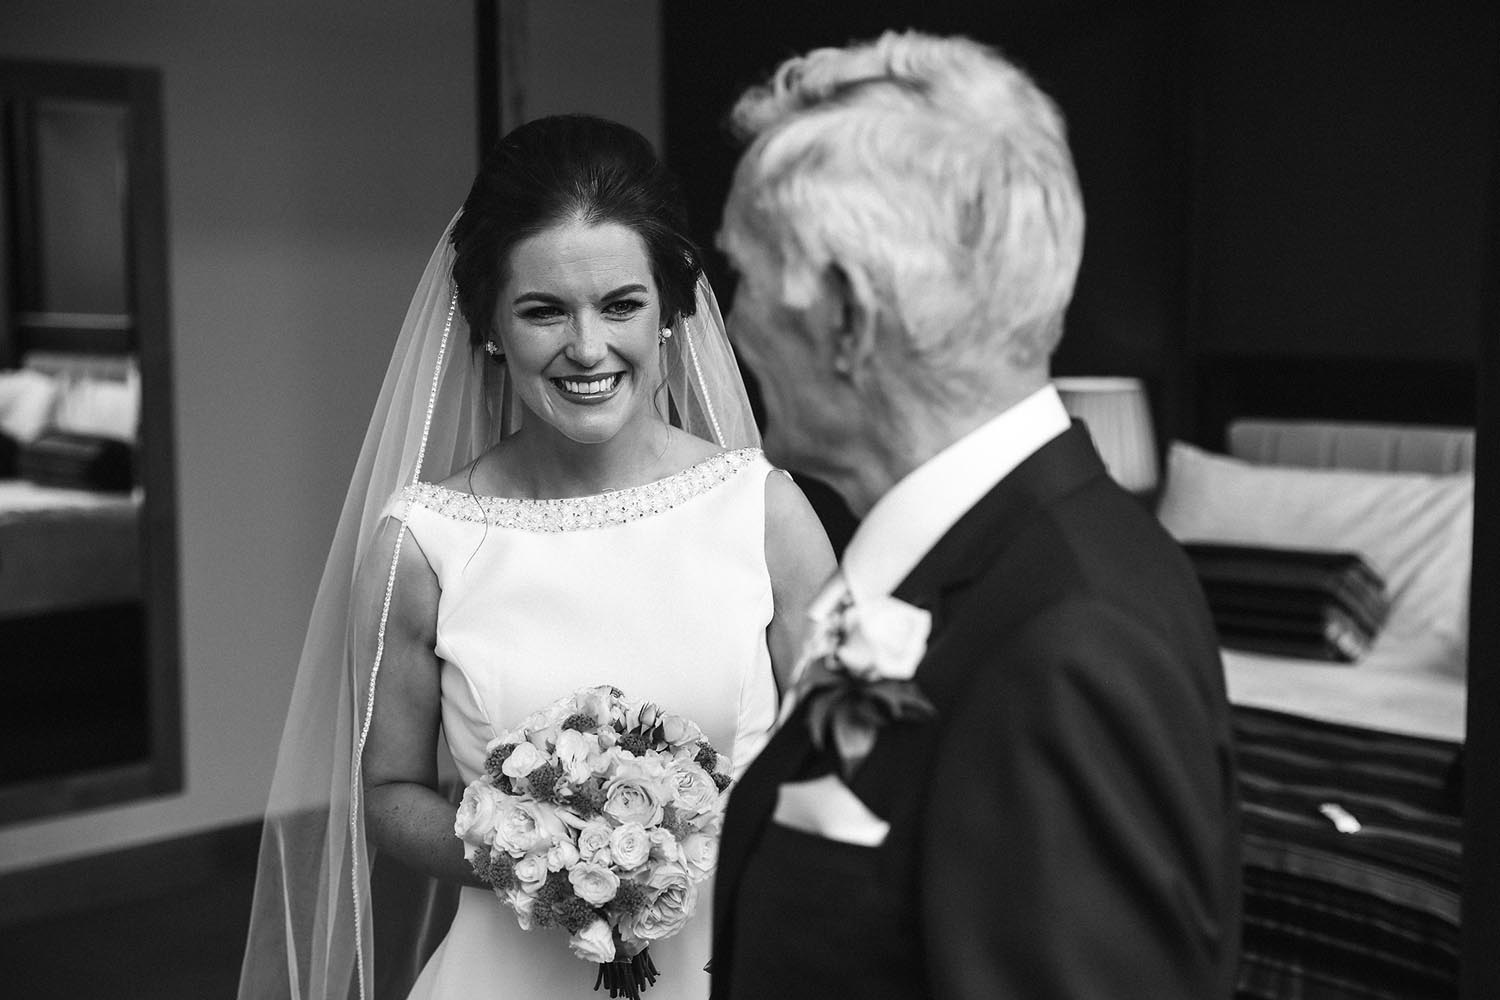 Bride and her father share a funny moment together